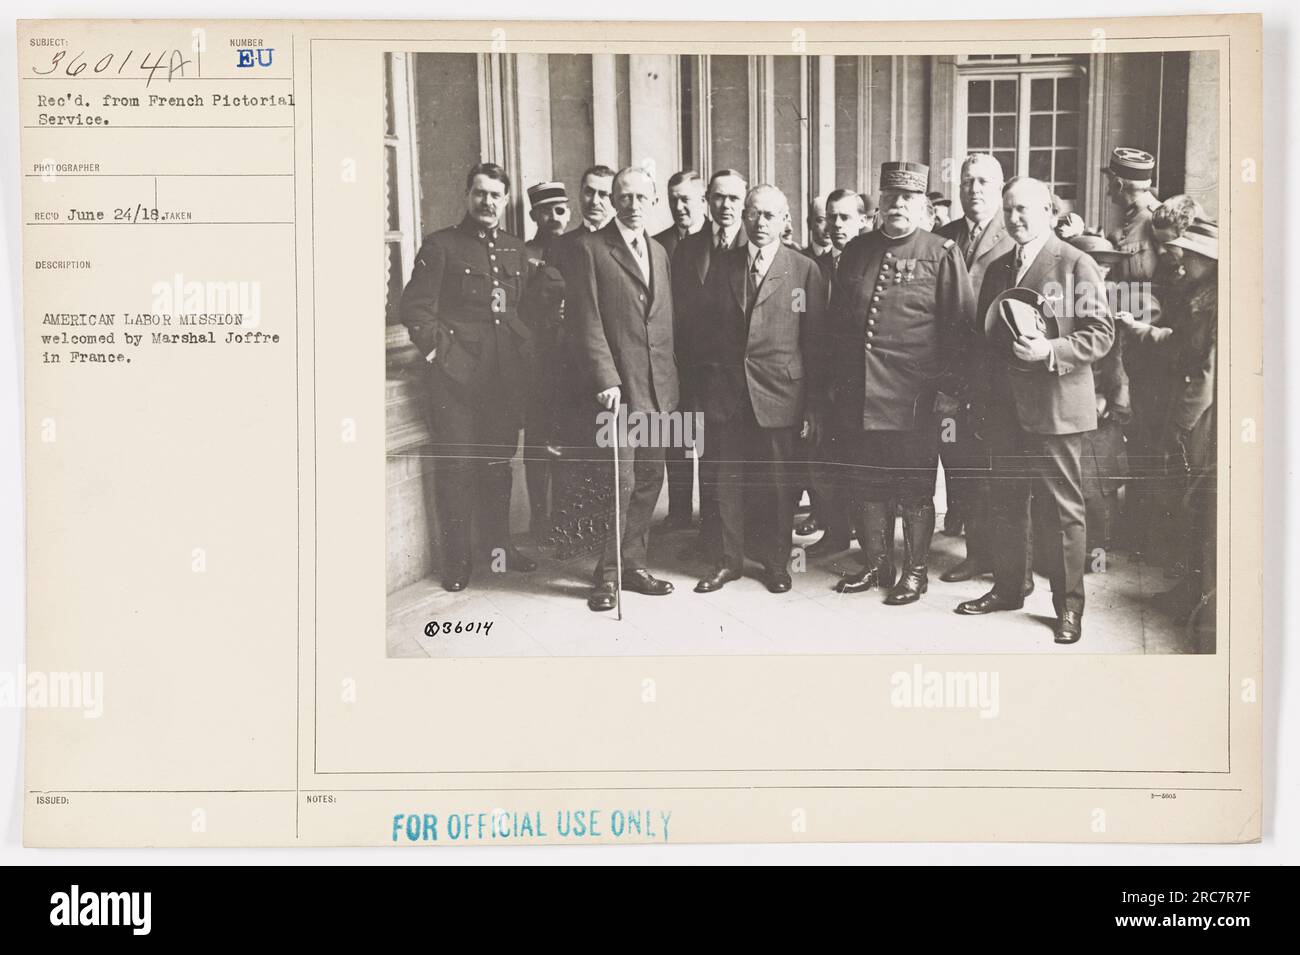 American Labor Mission being welcomed by Marshal Joffre in France during World War I. The photograph was taken by photographer BECO on June 24, 1918. The image is part of the 111-SC-36014a series from the French Pictorial Service. It is labeled 'FOR OFFICIAL USE ONLY.' Stock Photo